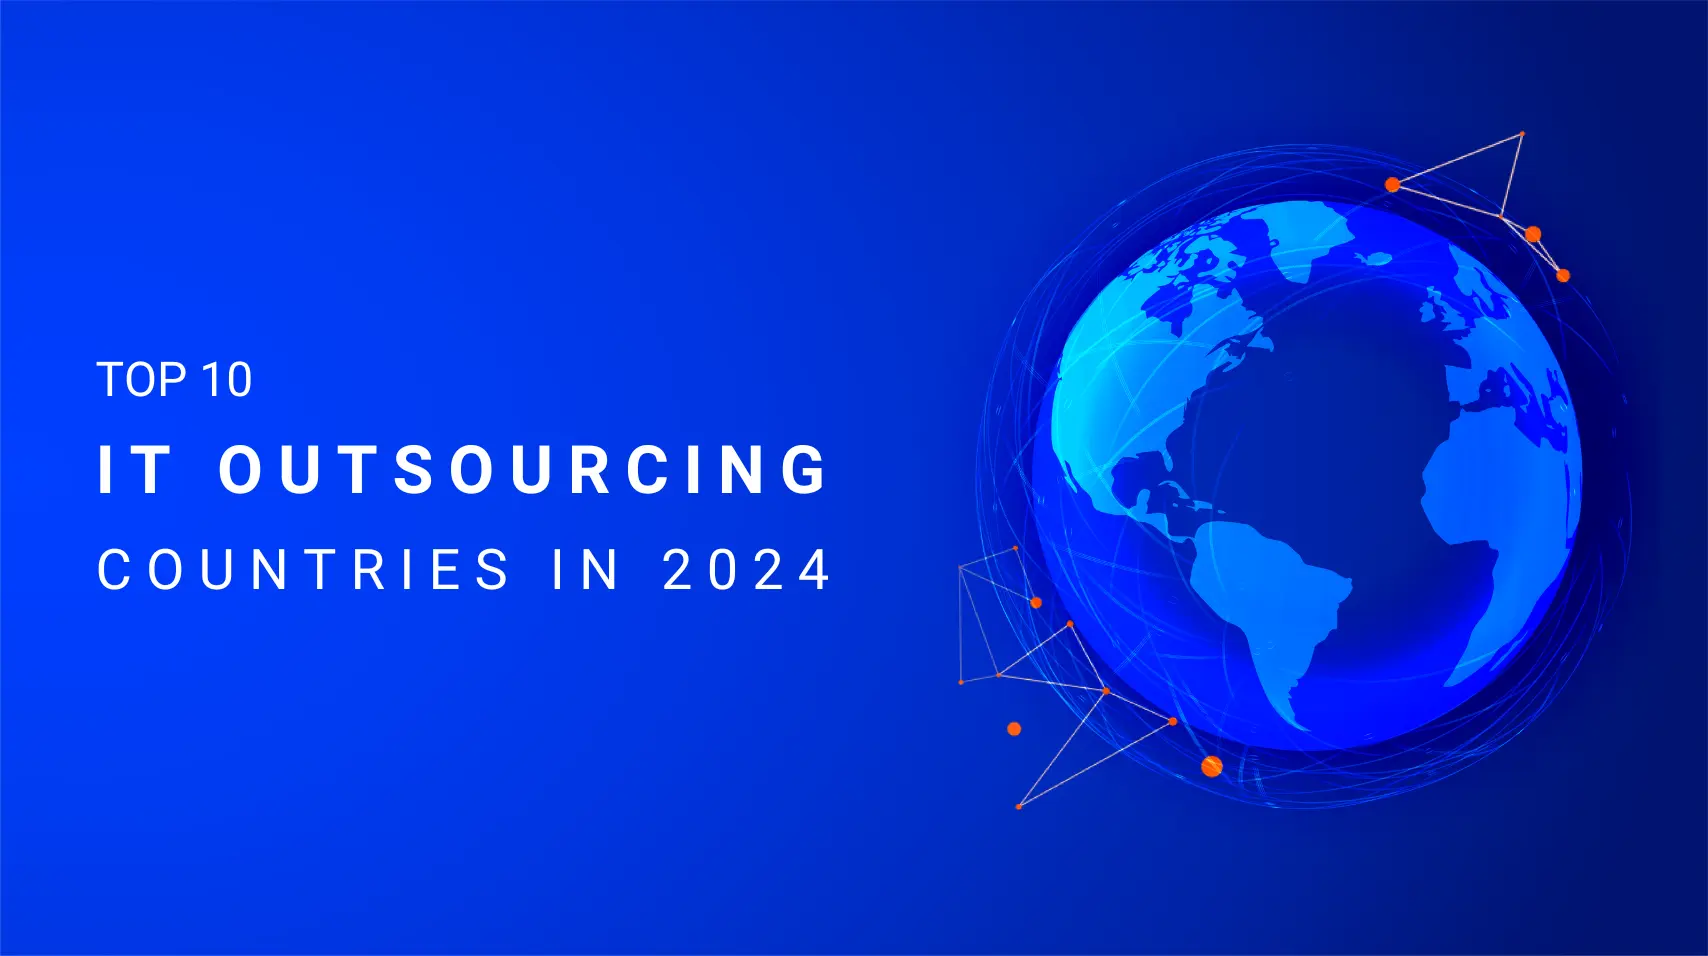 TOP 10 IT OUTSOURCING COUNTRIES IN 2024